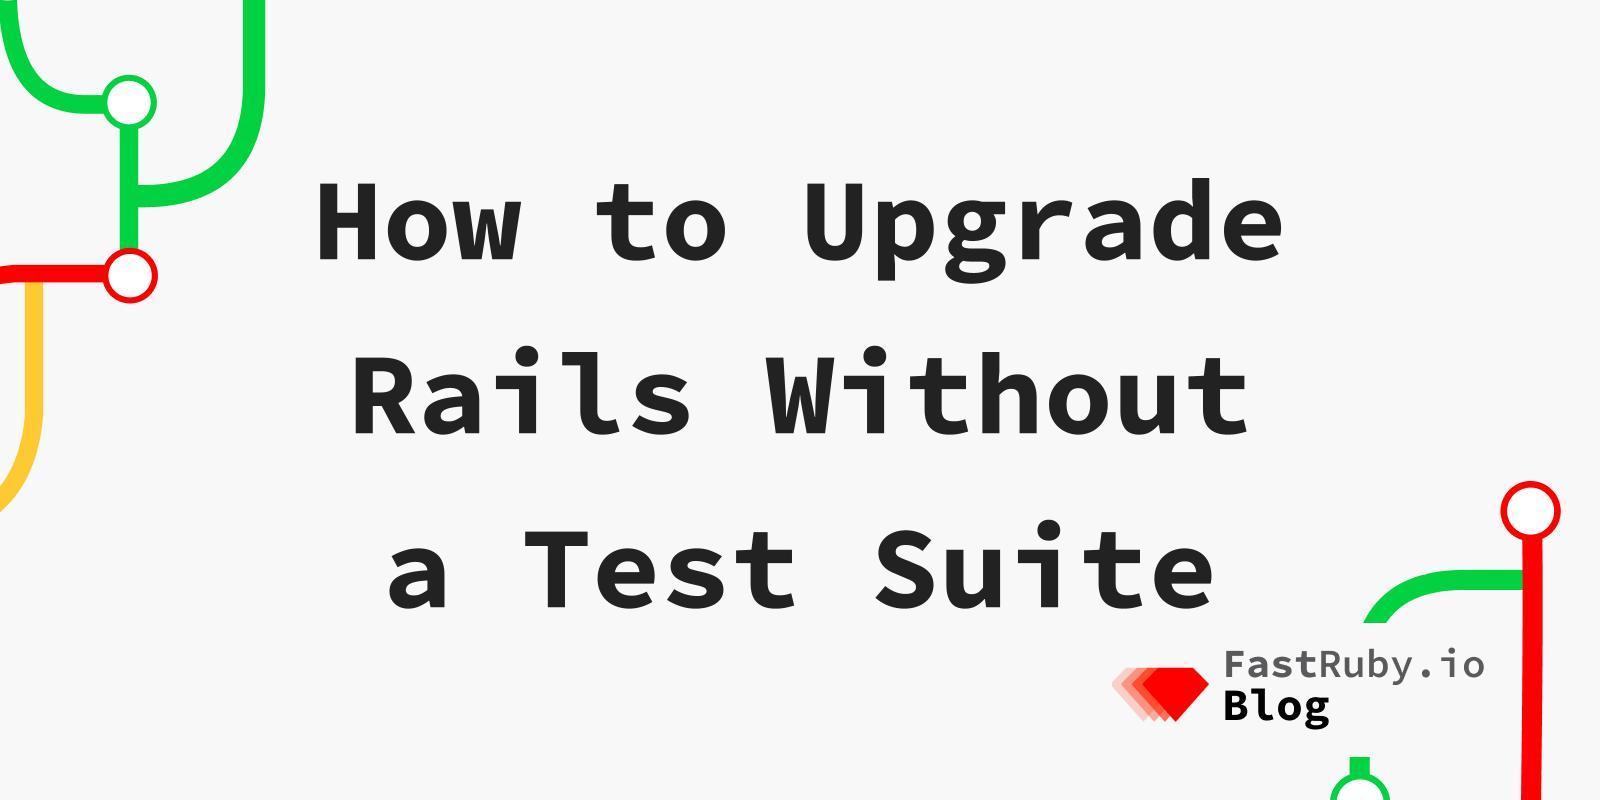 How to Upgrade Rails Without a Test Suite